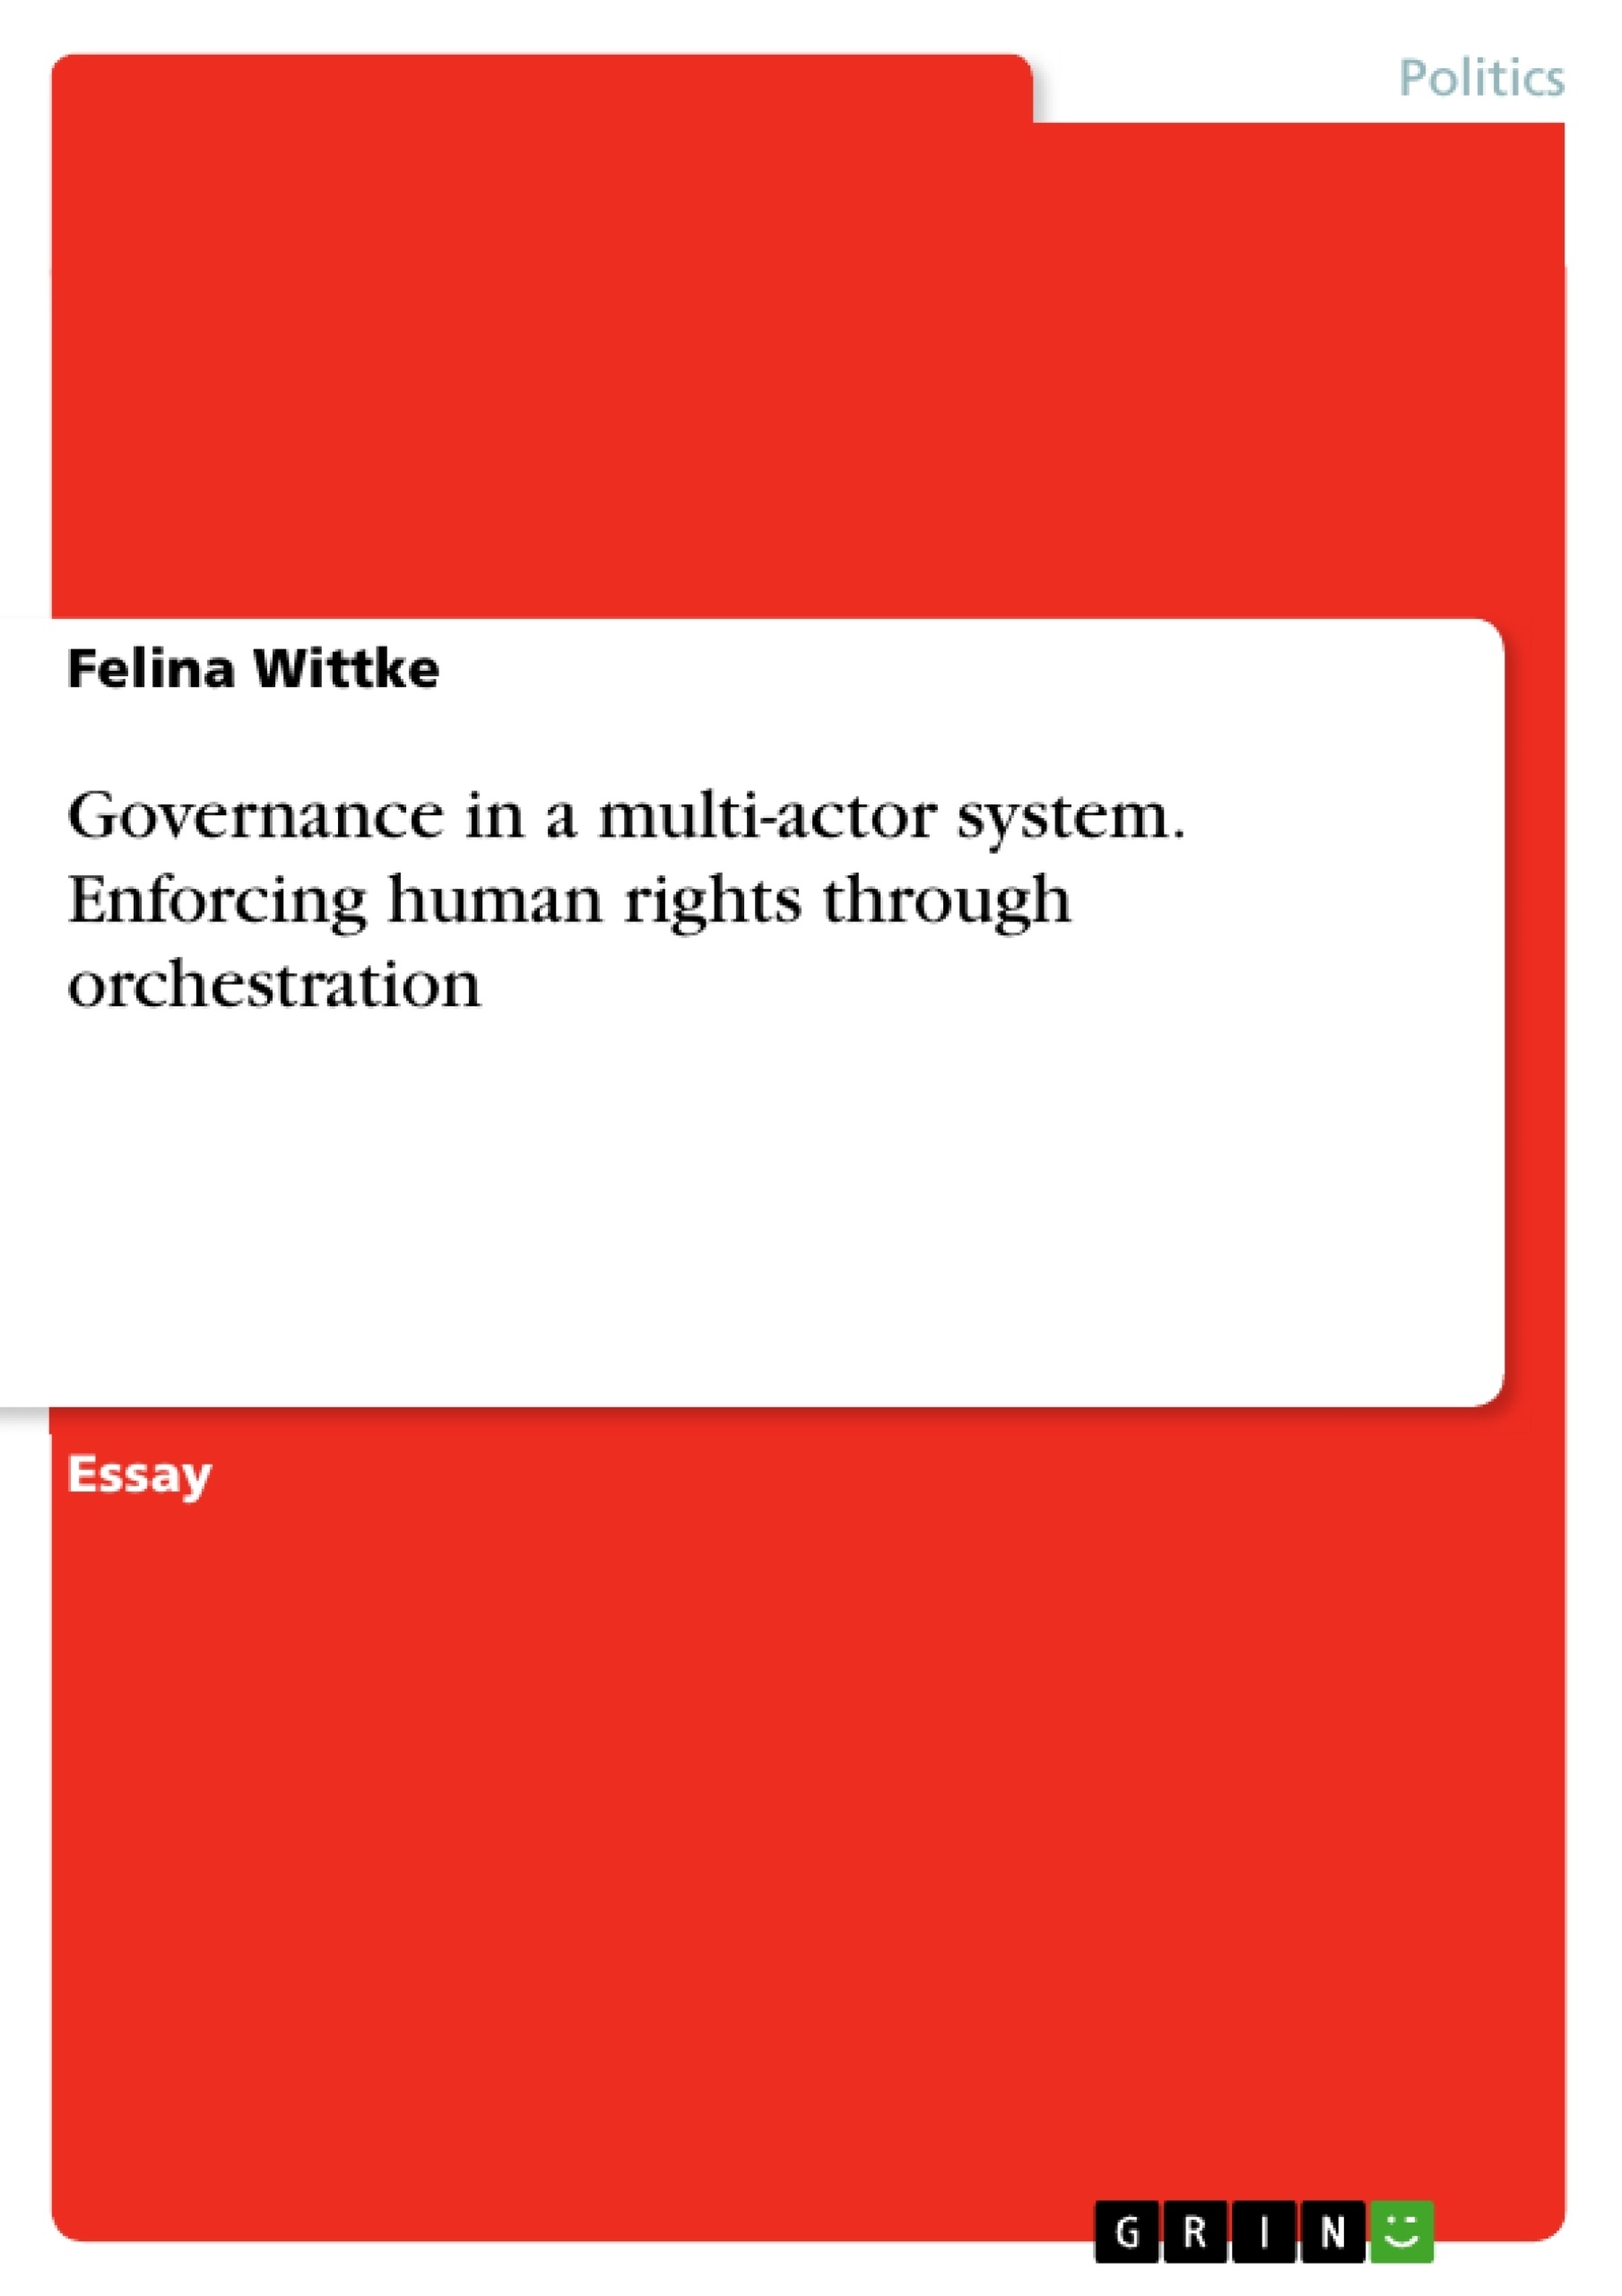 Titel: Governance in a multi-actor system. Enforcing human rights through orchestration